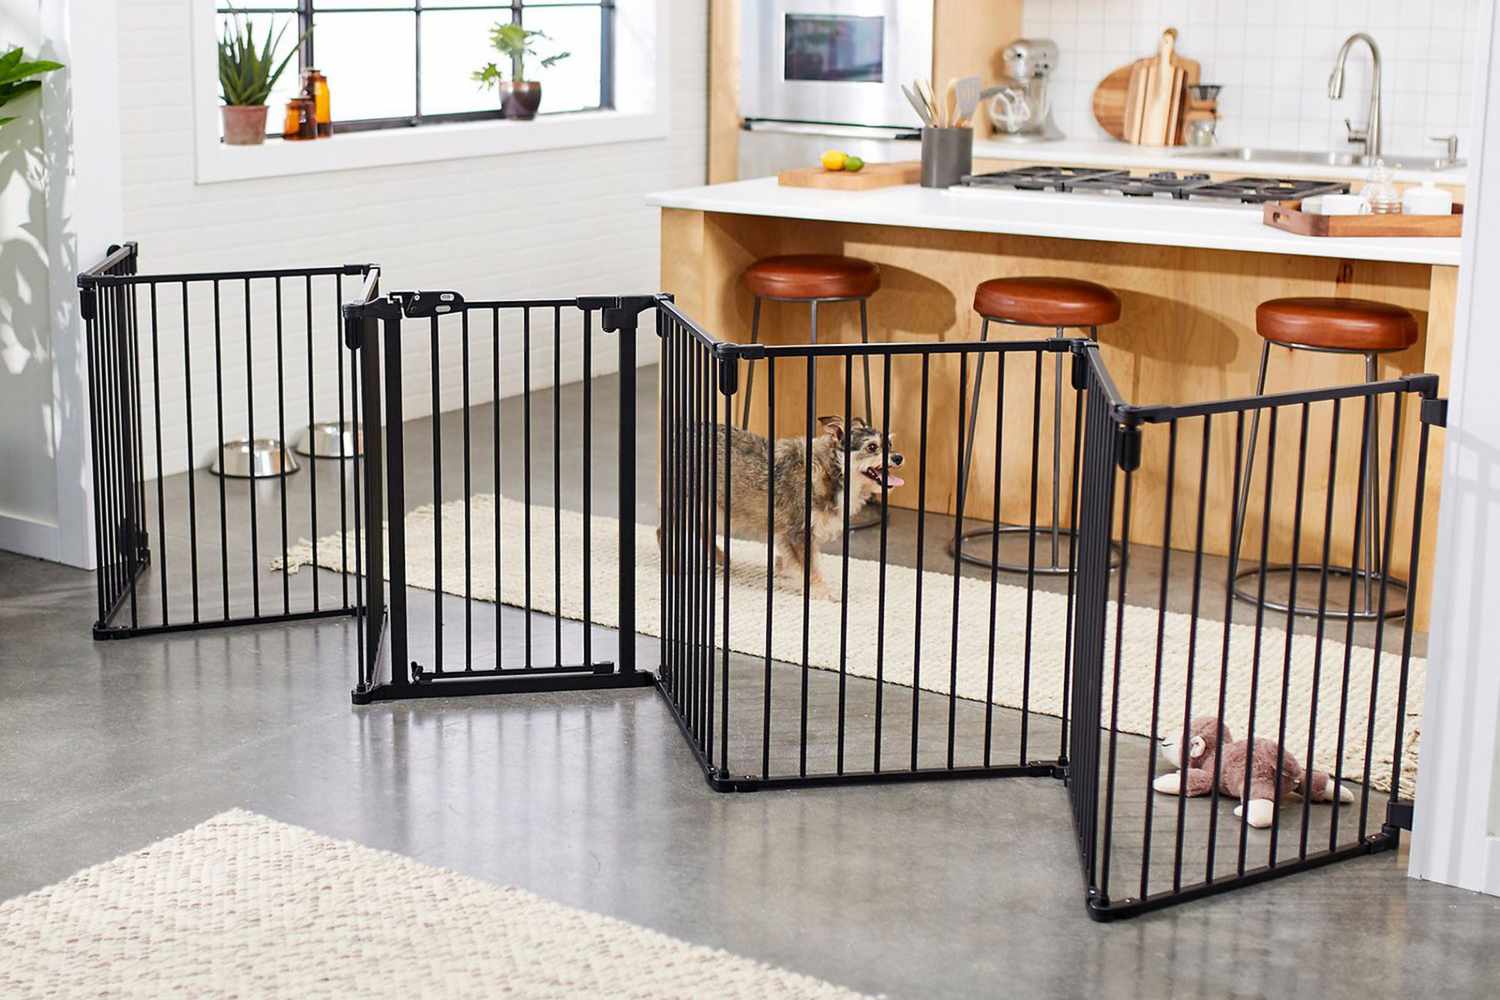 Collapsible Fence For Dogs